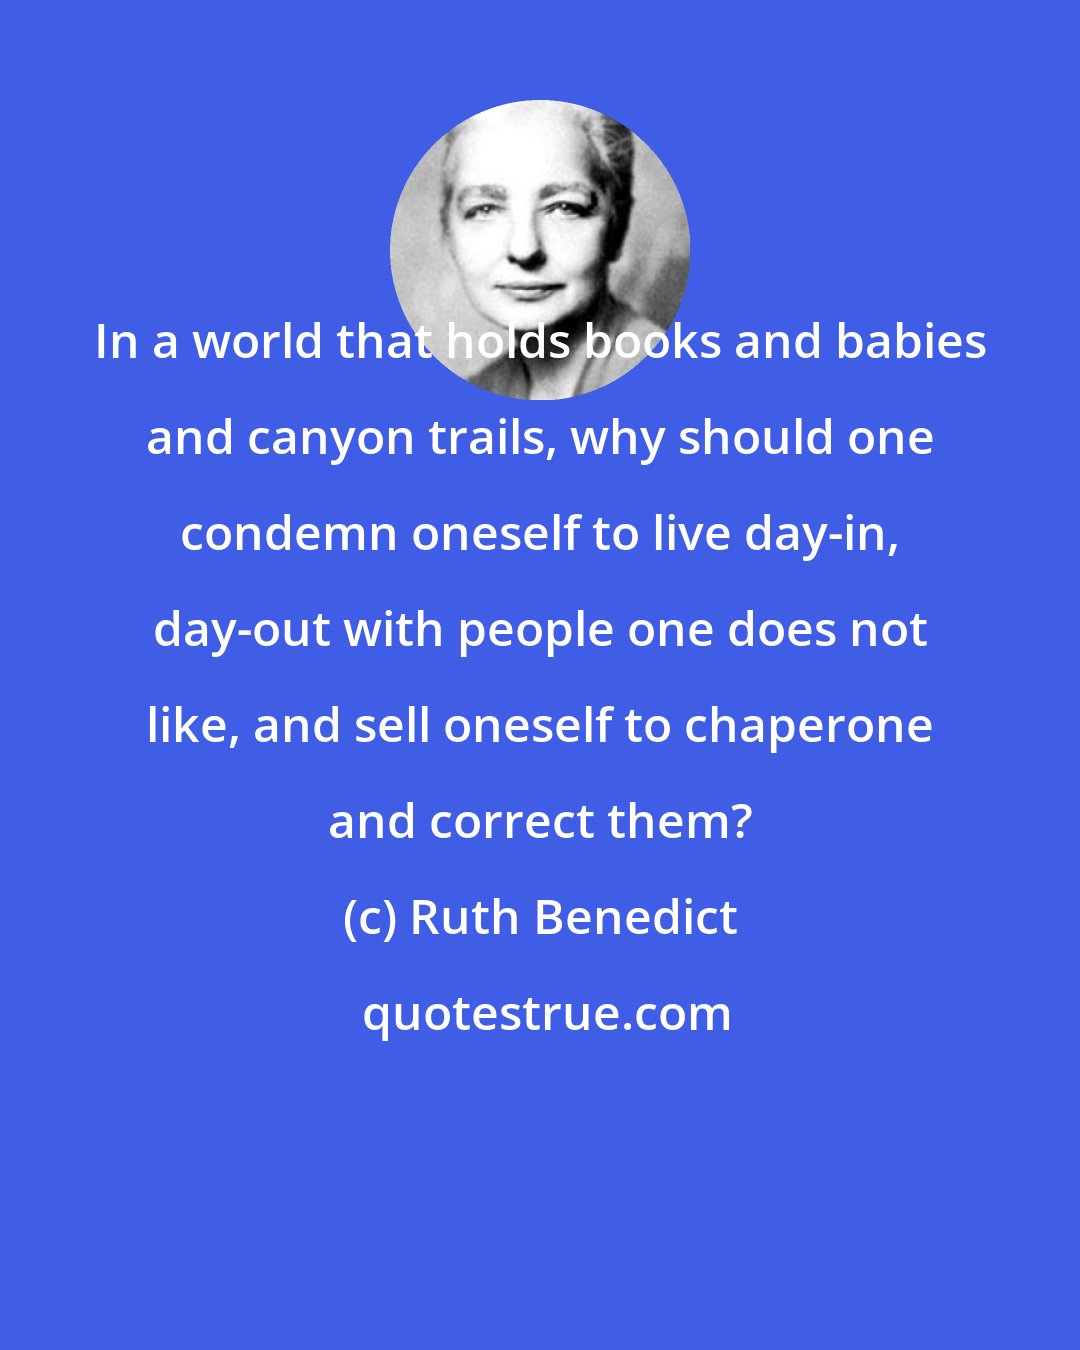 Ruth Benedict: In a world that holds books and babies and canyon trails, why should one condemn oneself to live day-in, day-out with people one does not like, and sell oneself to chaperone and correct them?